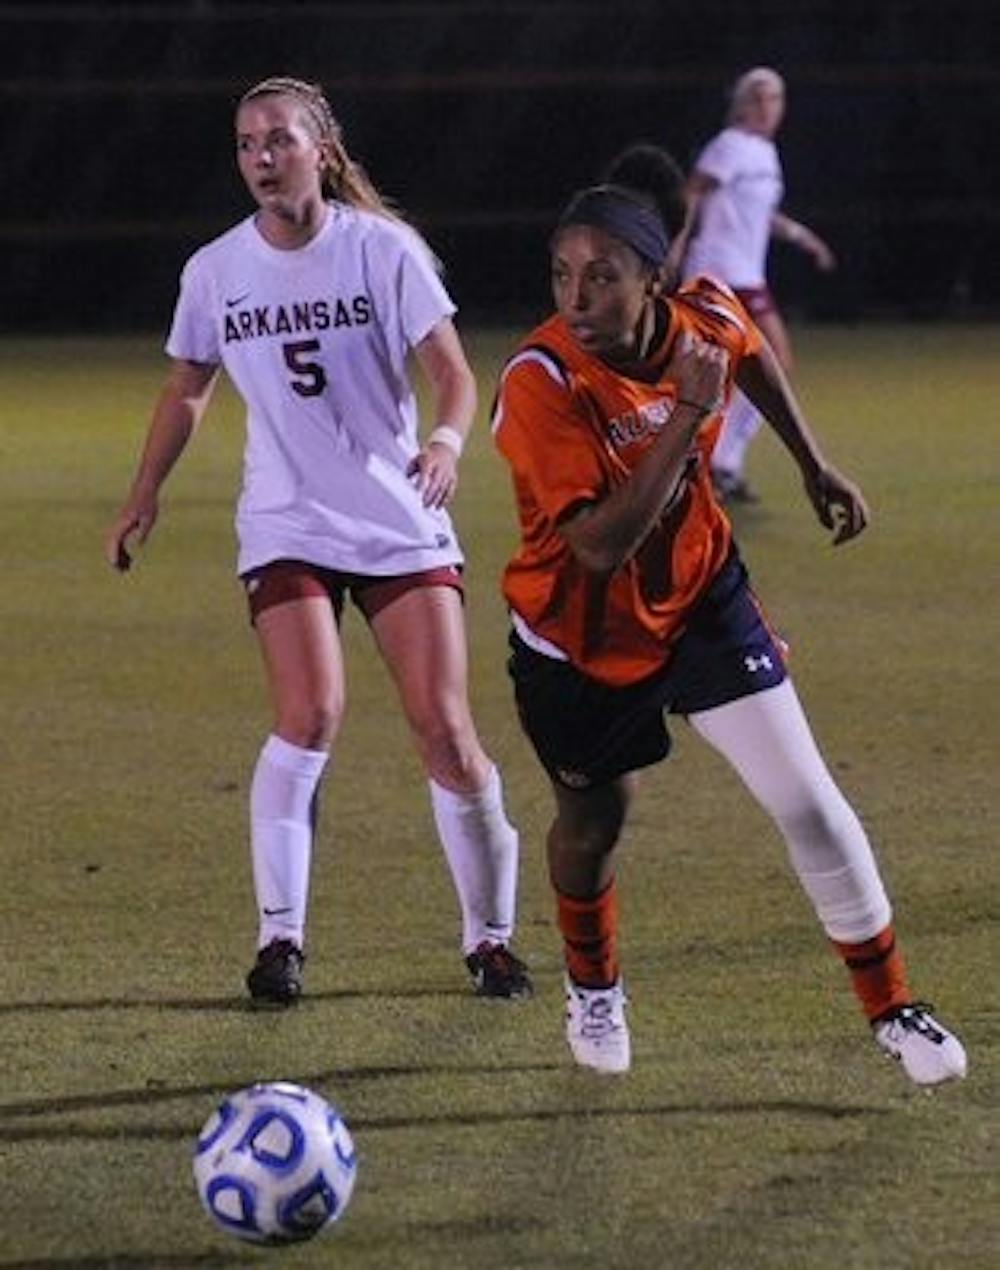 Chelsea Gandy-Cromer fighting for the ball against Arkansas. (Contributed by Kyle Taylor and Auburn Athletics)